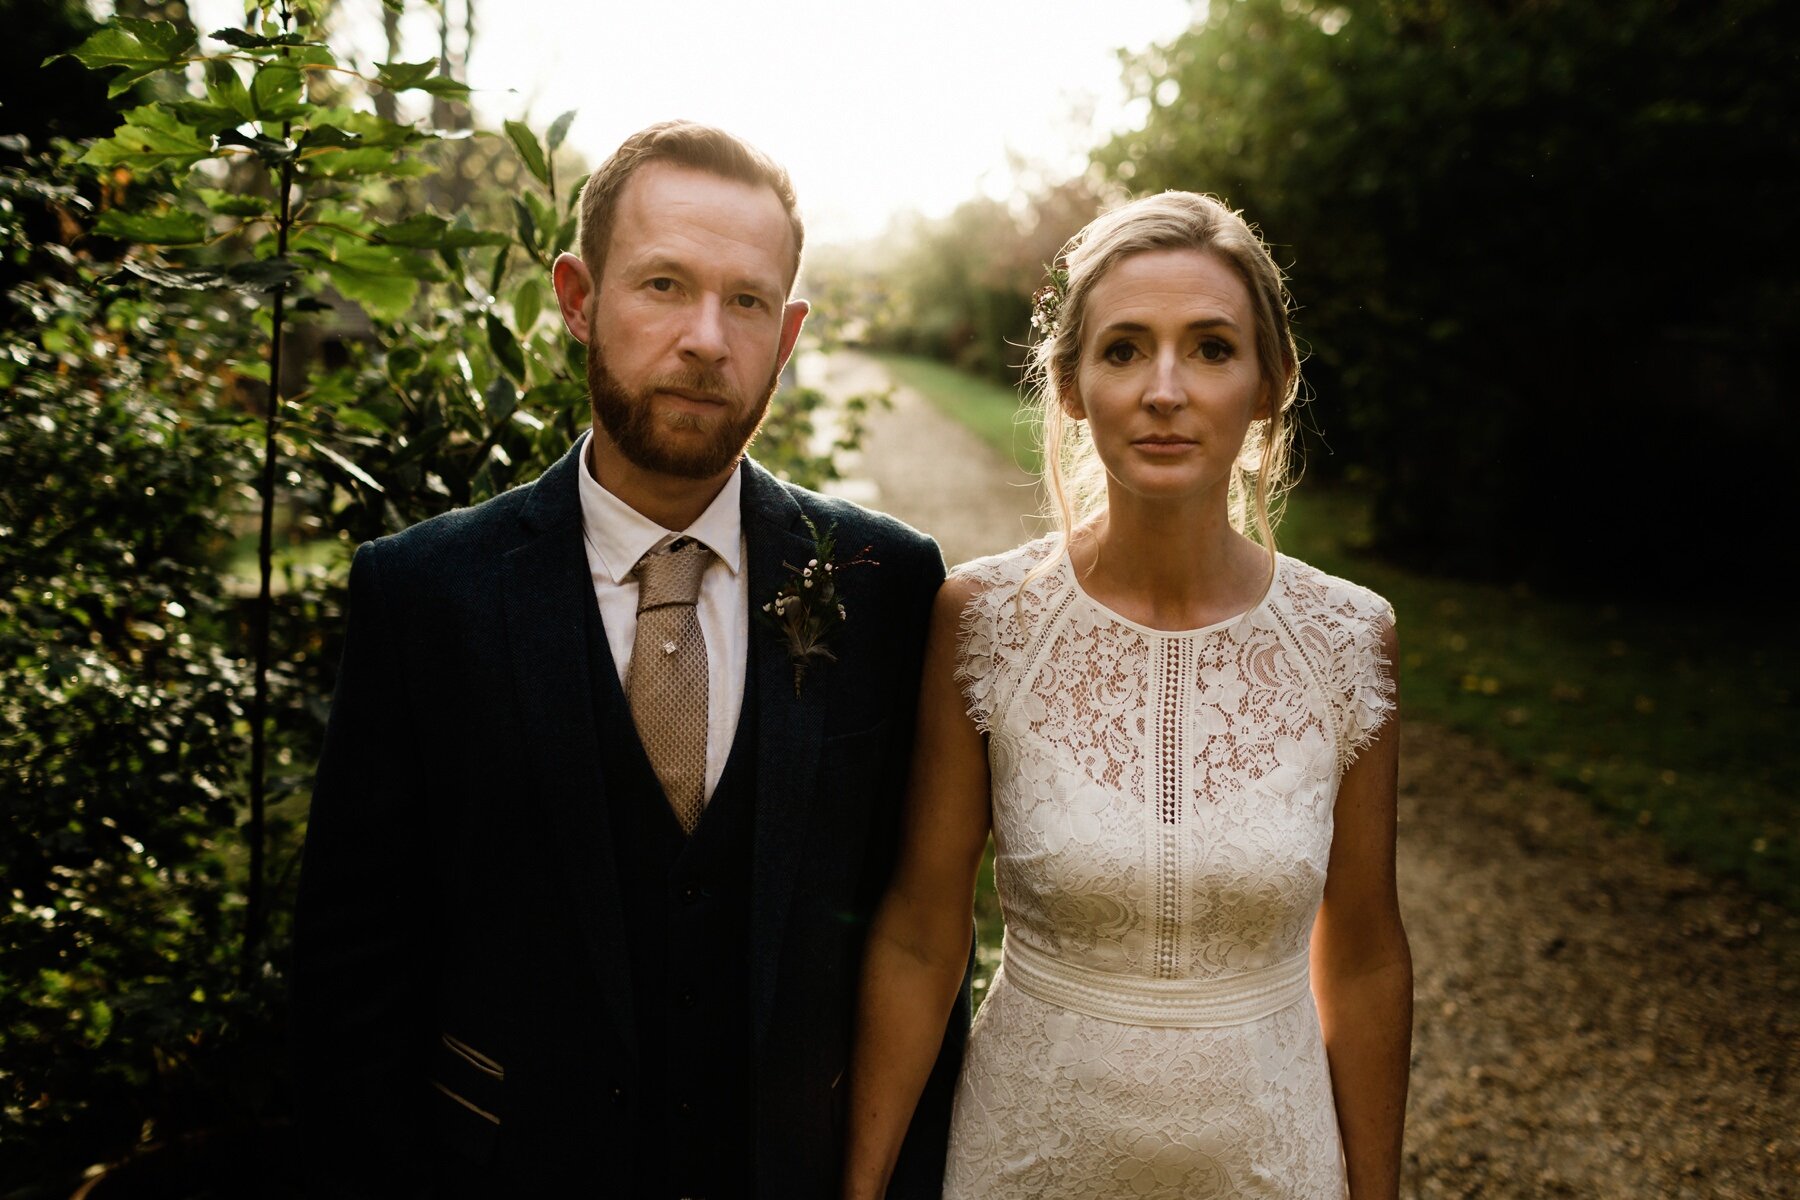 A bride and groom portrait at Horsley Towers